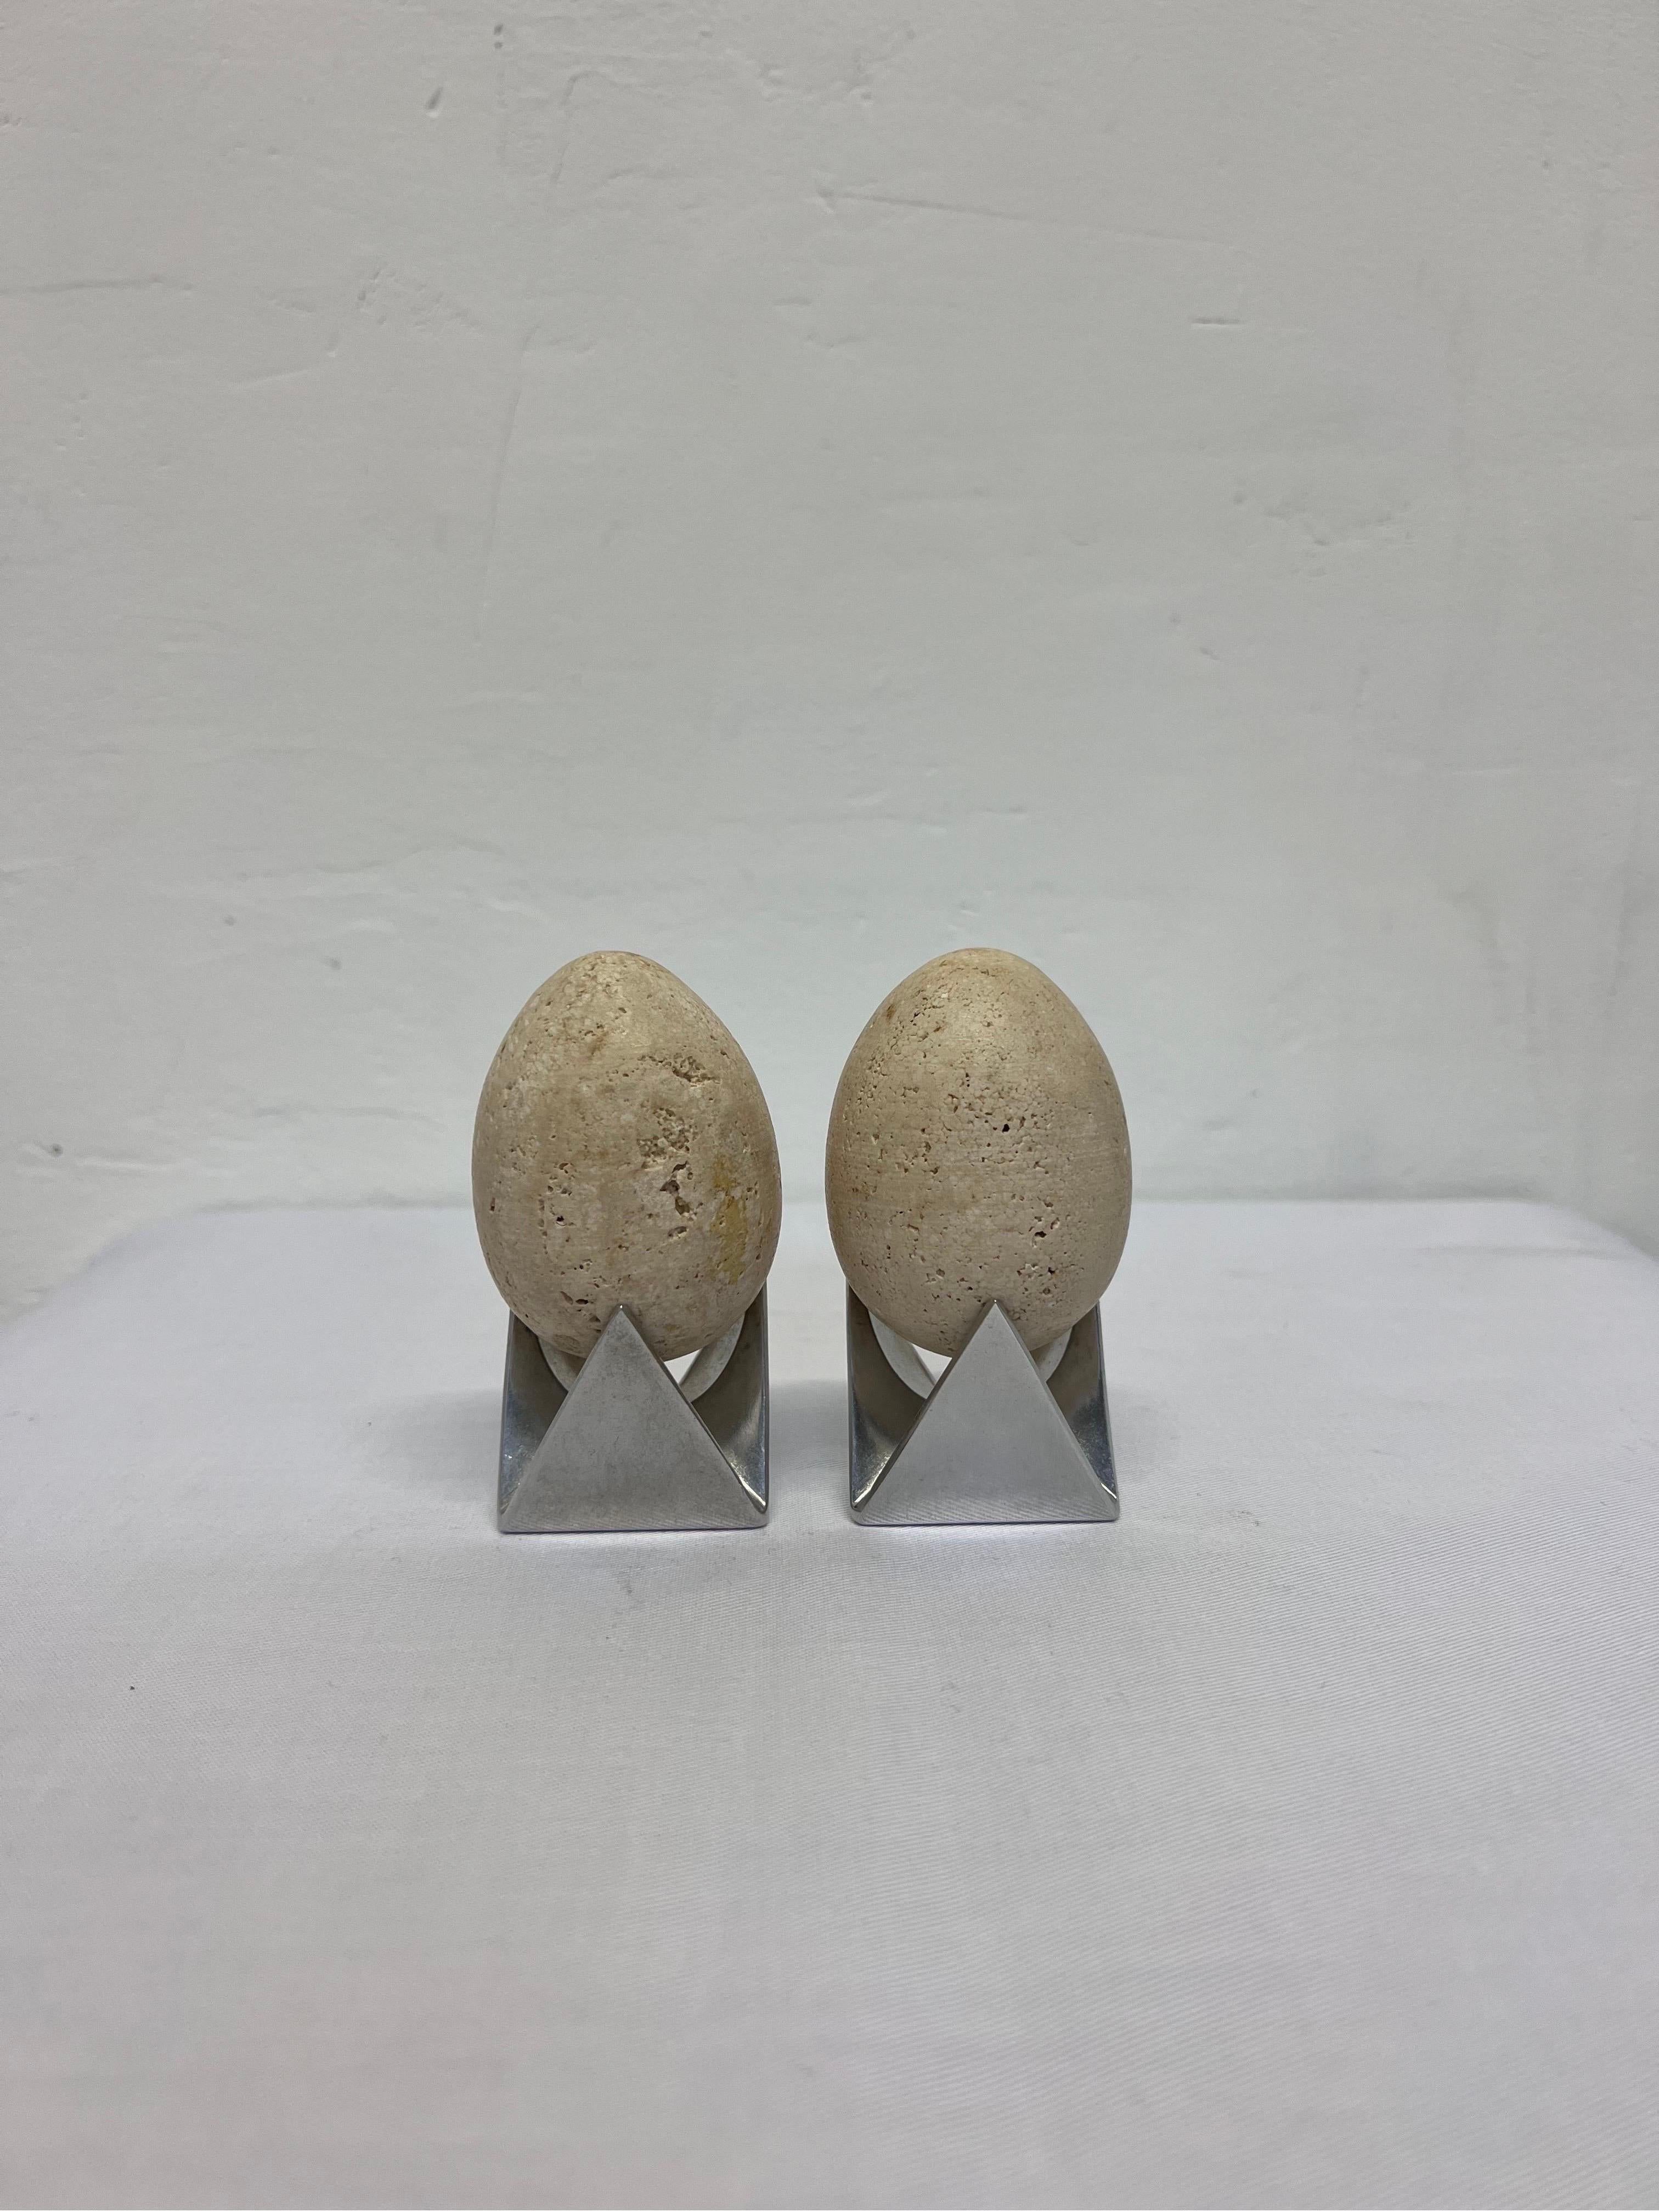 Italian Mid-Century Travertine Egg Sculptures Atop Alessi Roost Egg Cups, a Pair For Sale